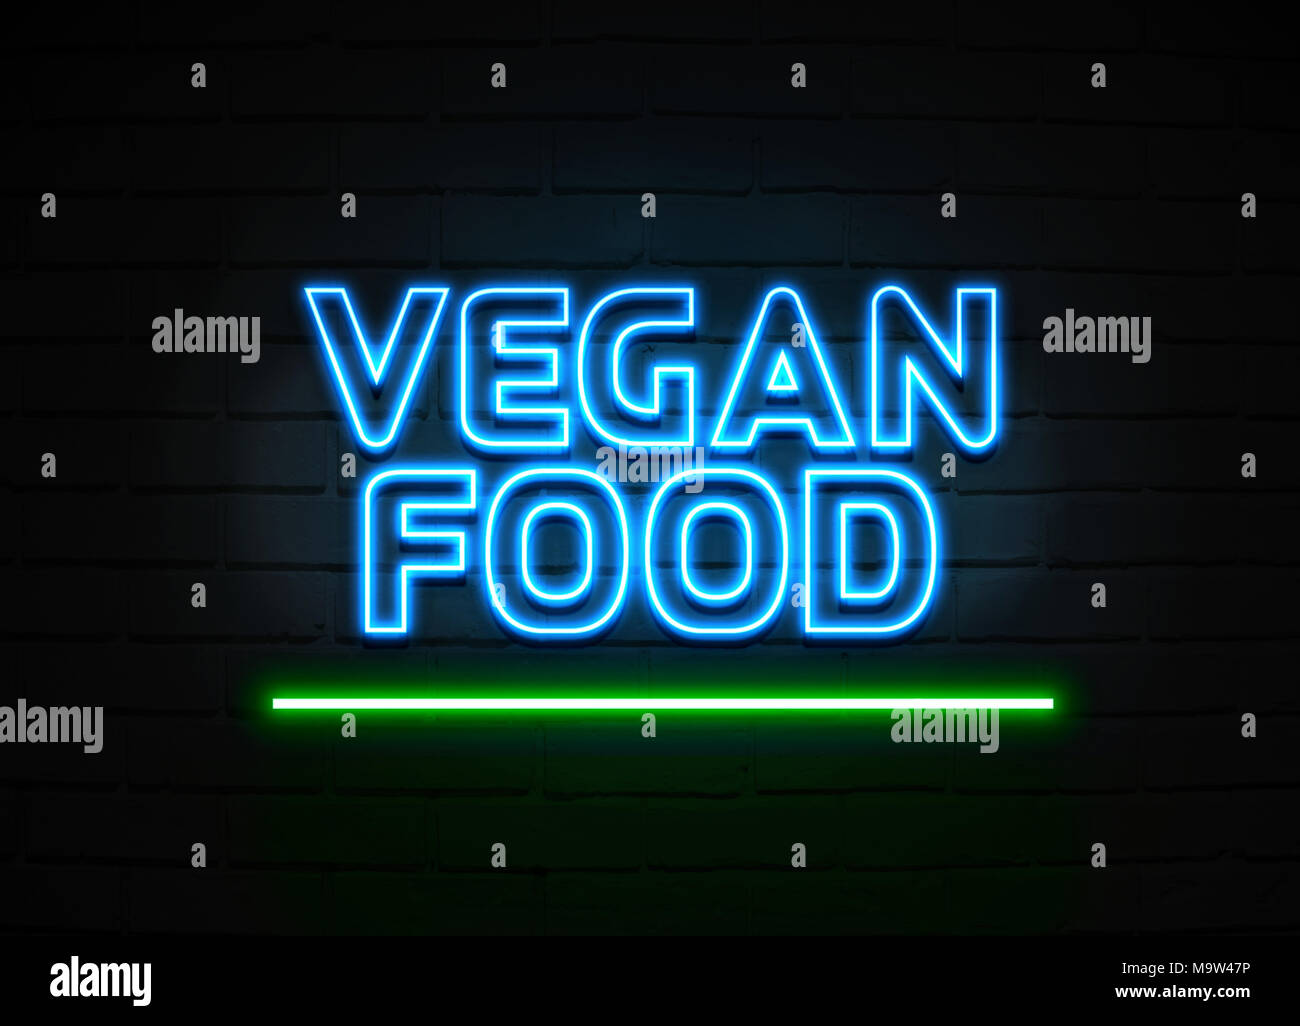 Vegan Food neon sign - Glowing Neon Sign on brickwall wall - 3D rendered royalty free stock illustration. Stock Photo